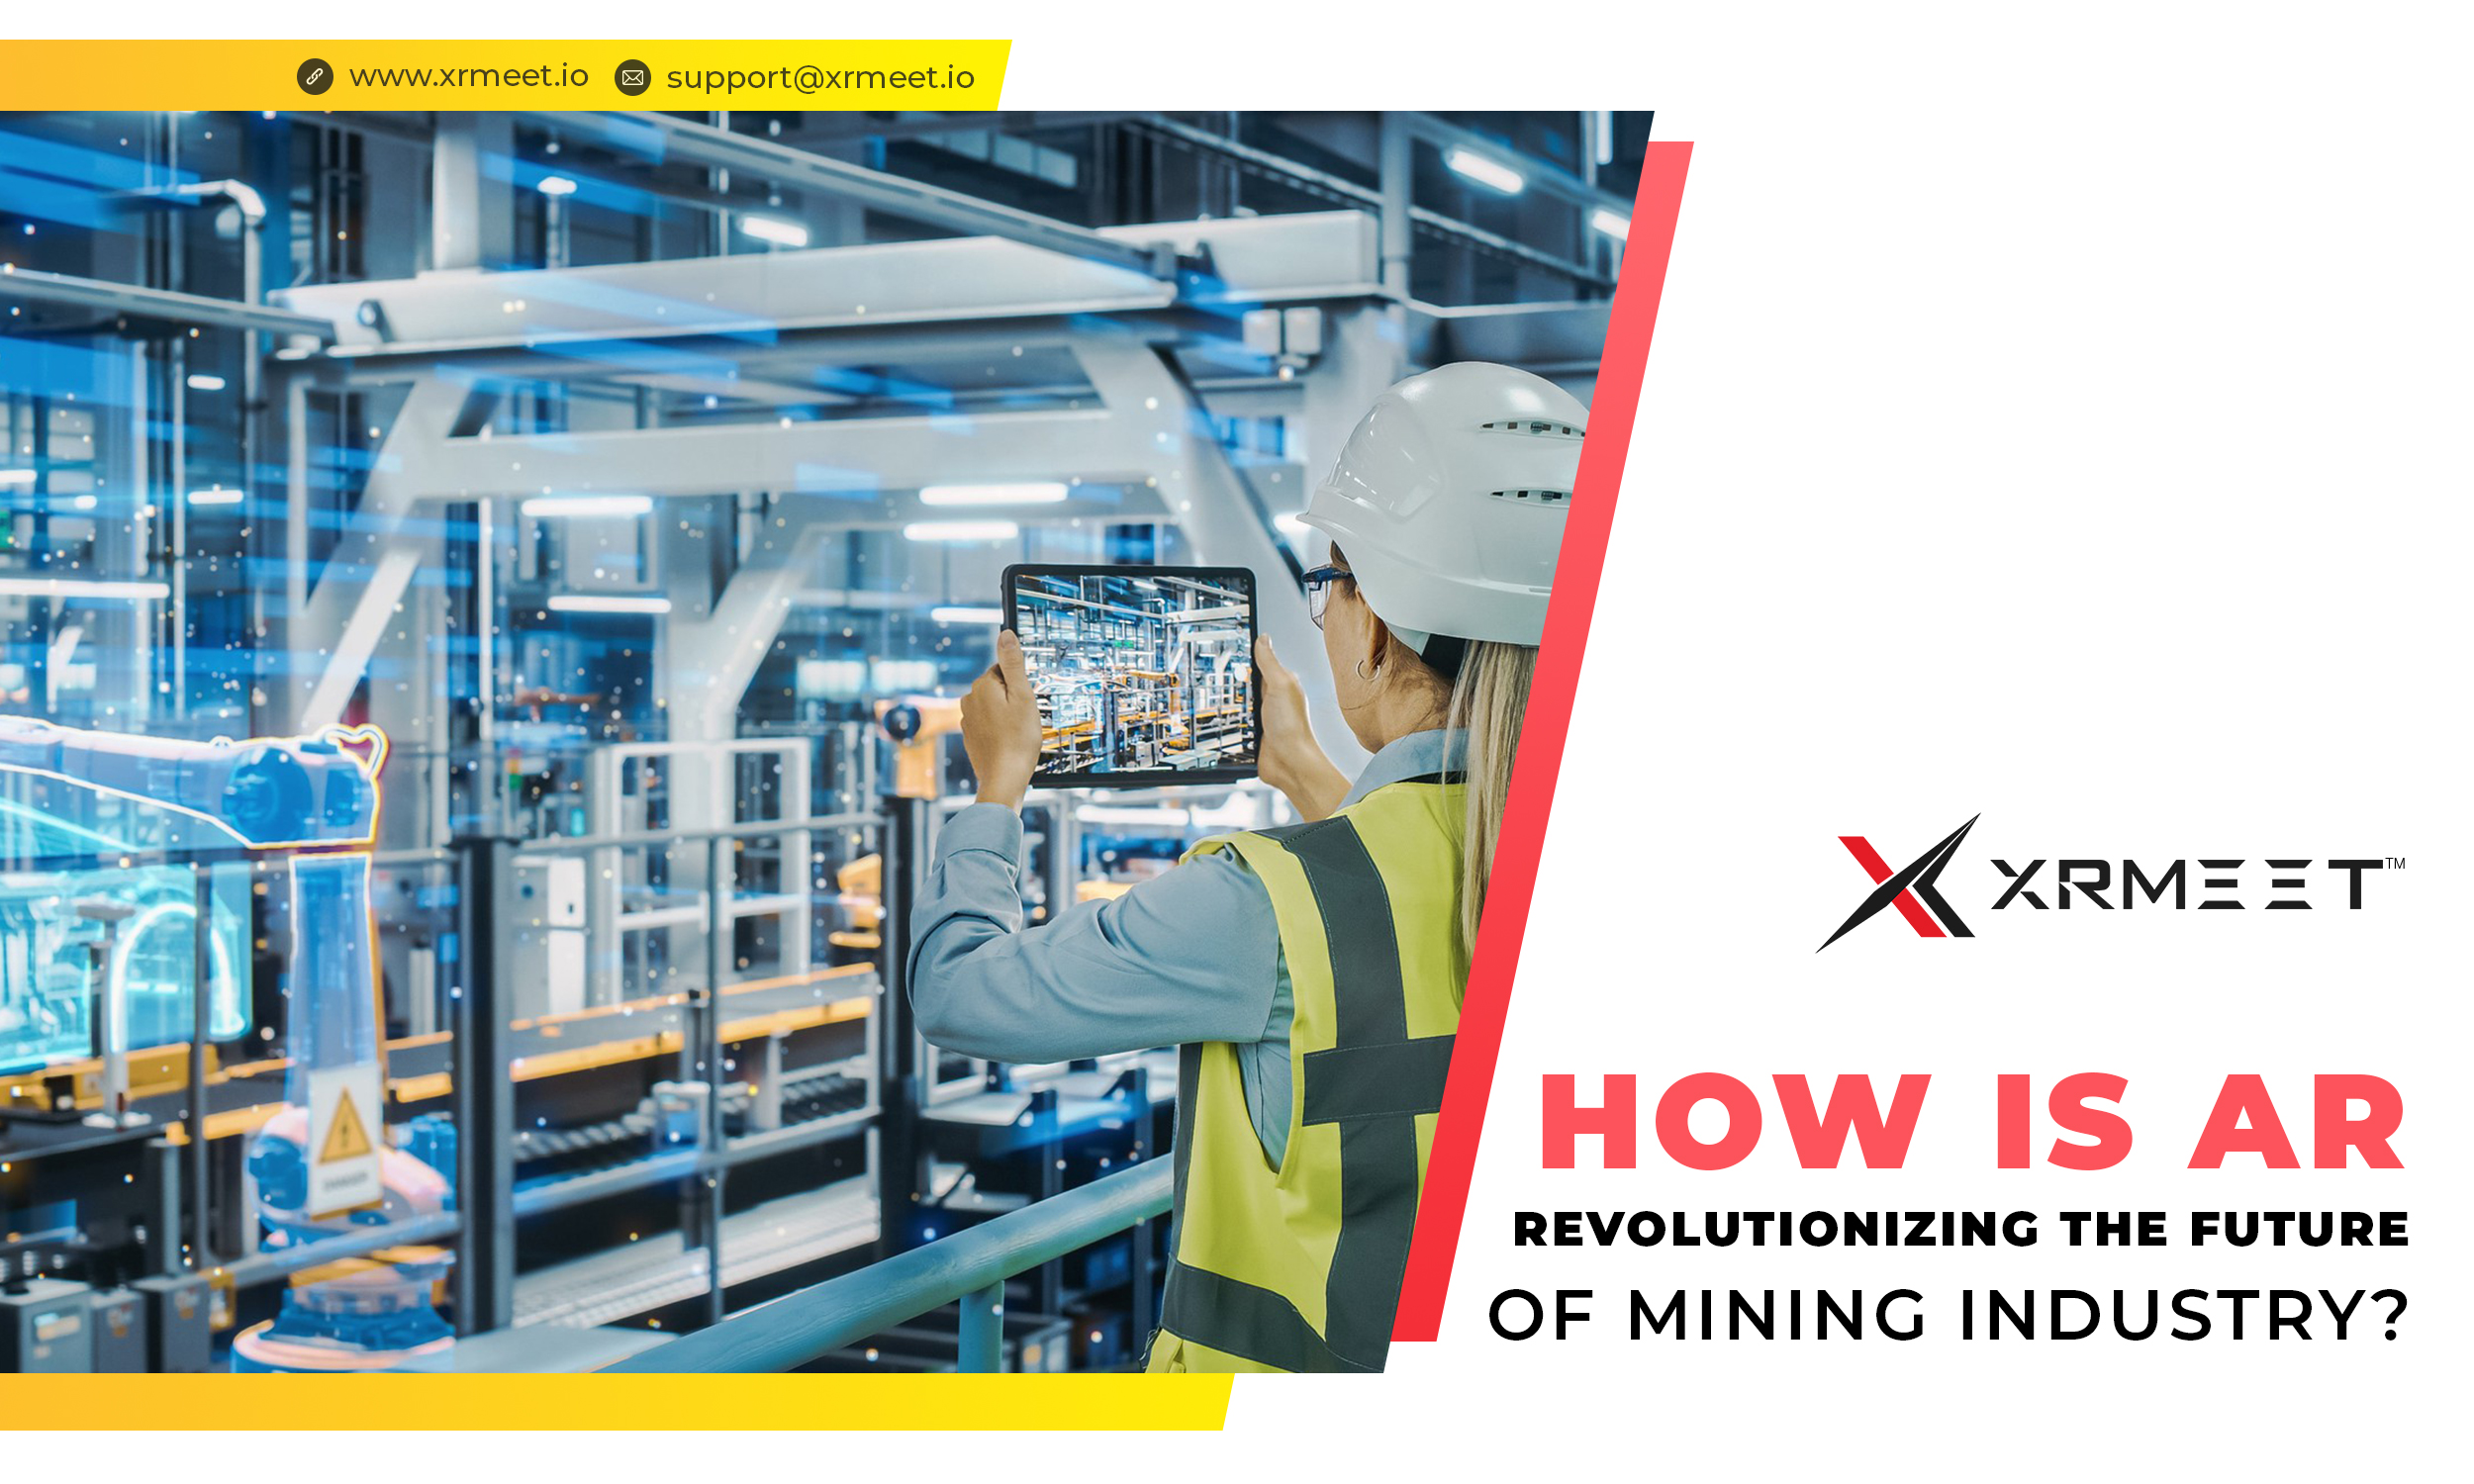 How is AR revolutionizing the future of mining industry